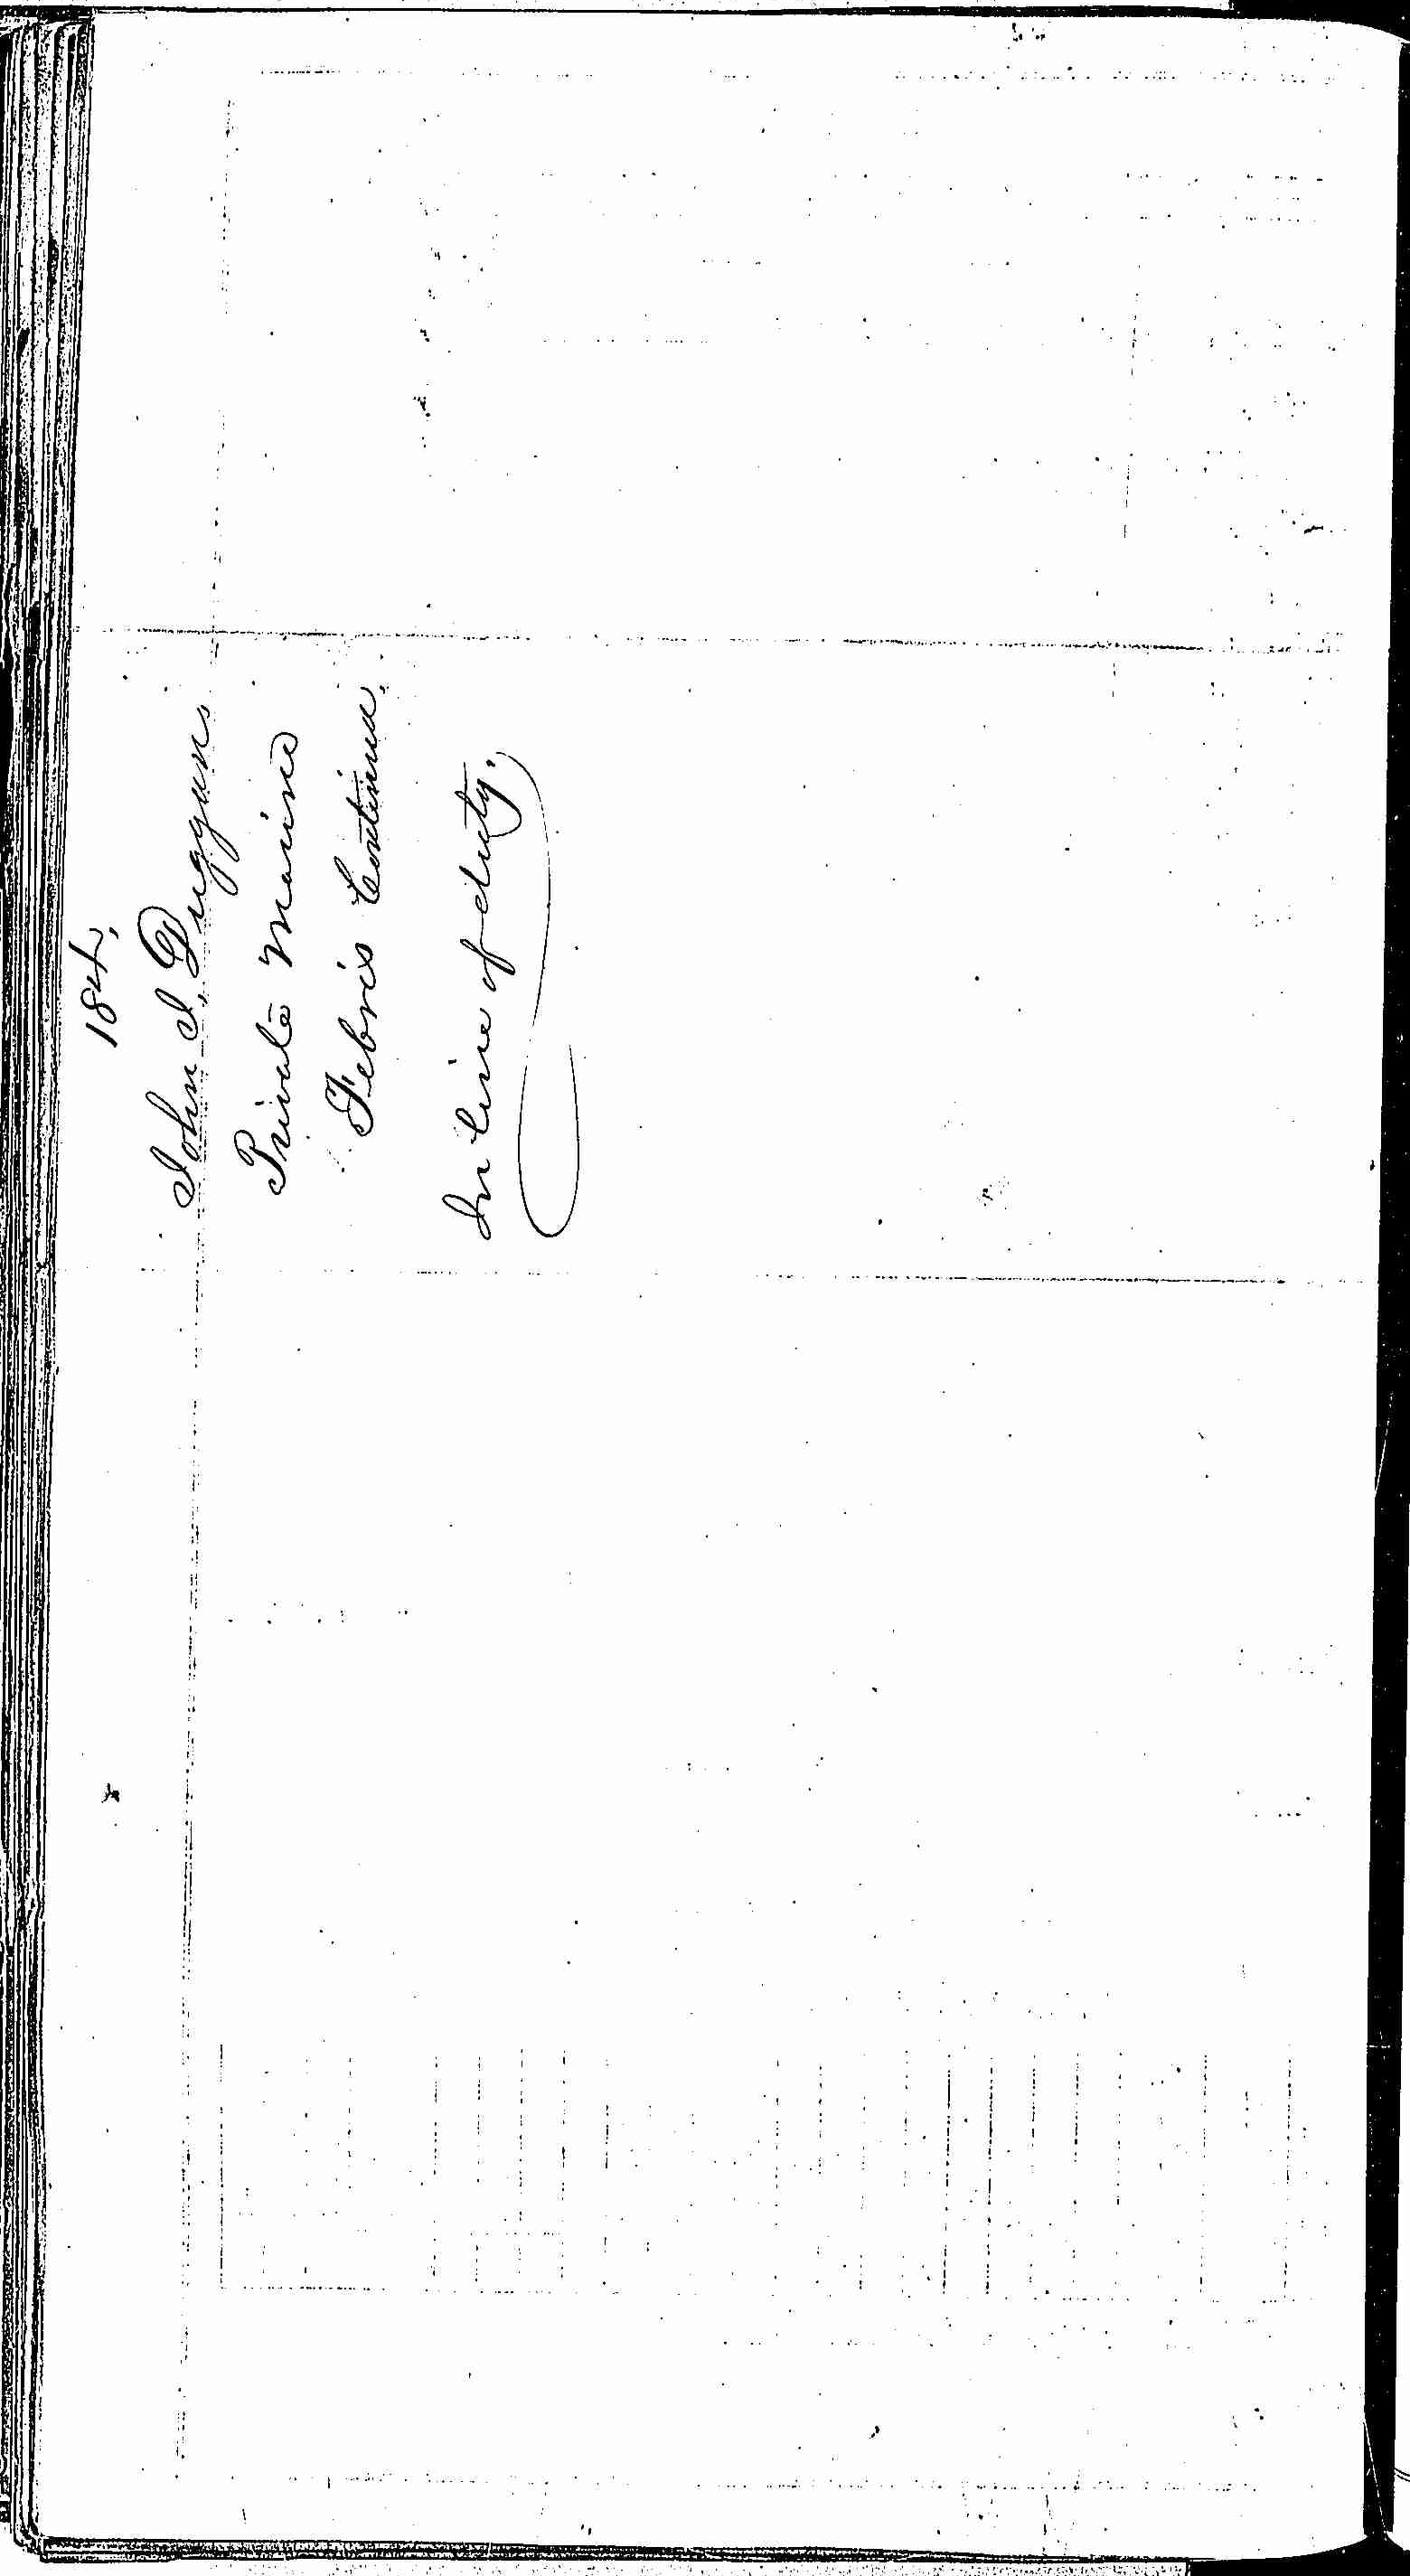 Entry for John J. Duggan (page 2 of 2) in the log Hospital Tickets and Case Papers - Naval Hospital - Washington, D.C. - 1866-68